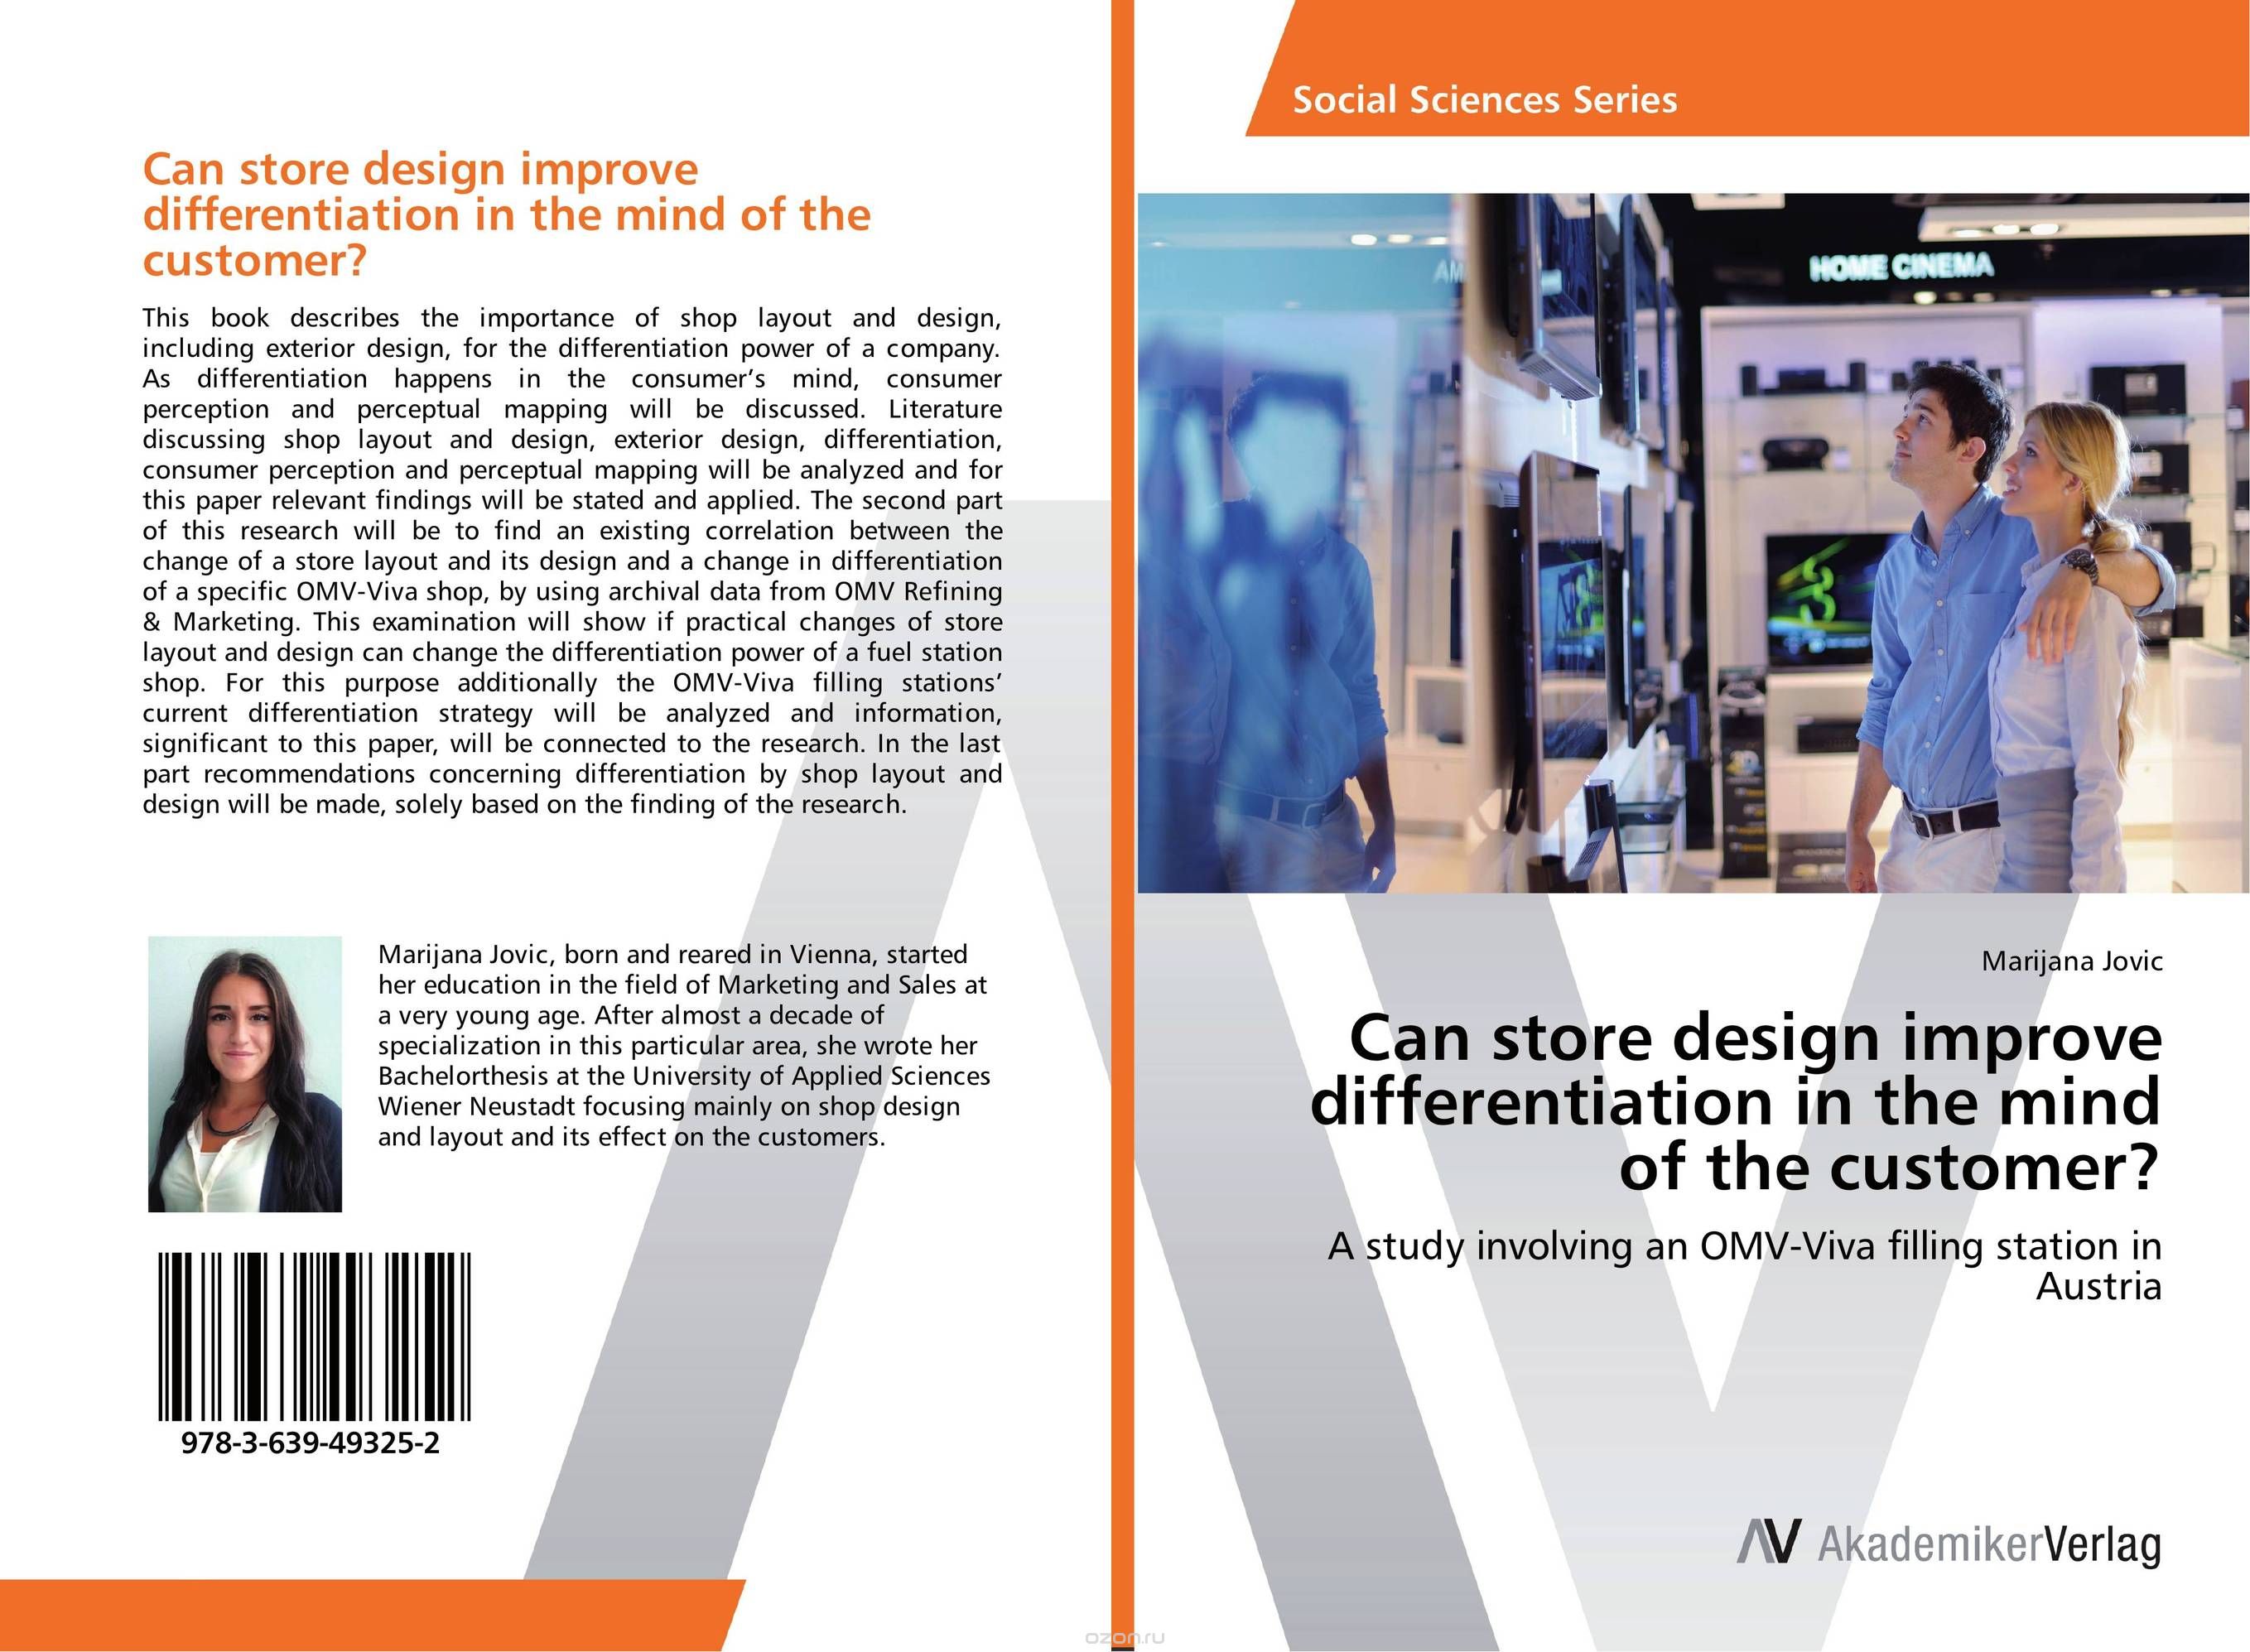 Can store design improve differentiation in the mind of the customer?